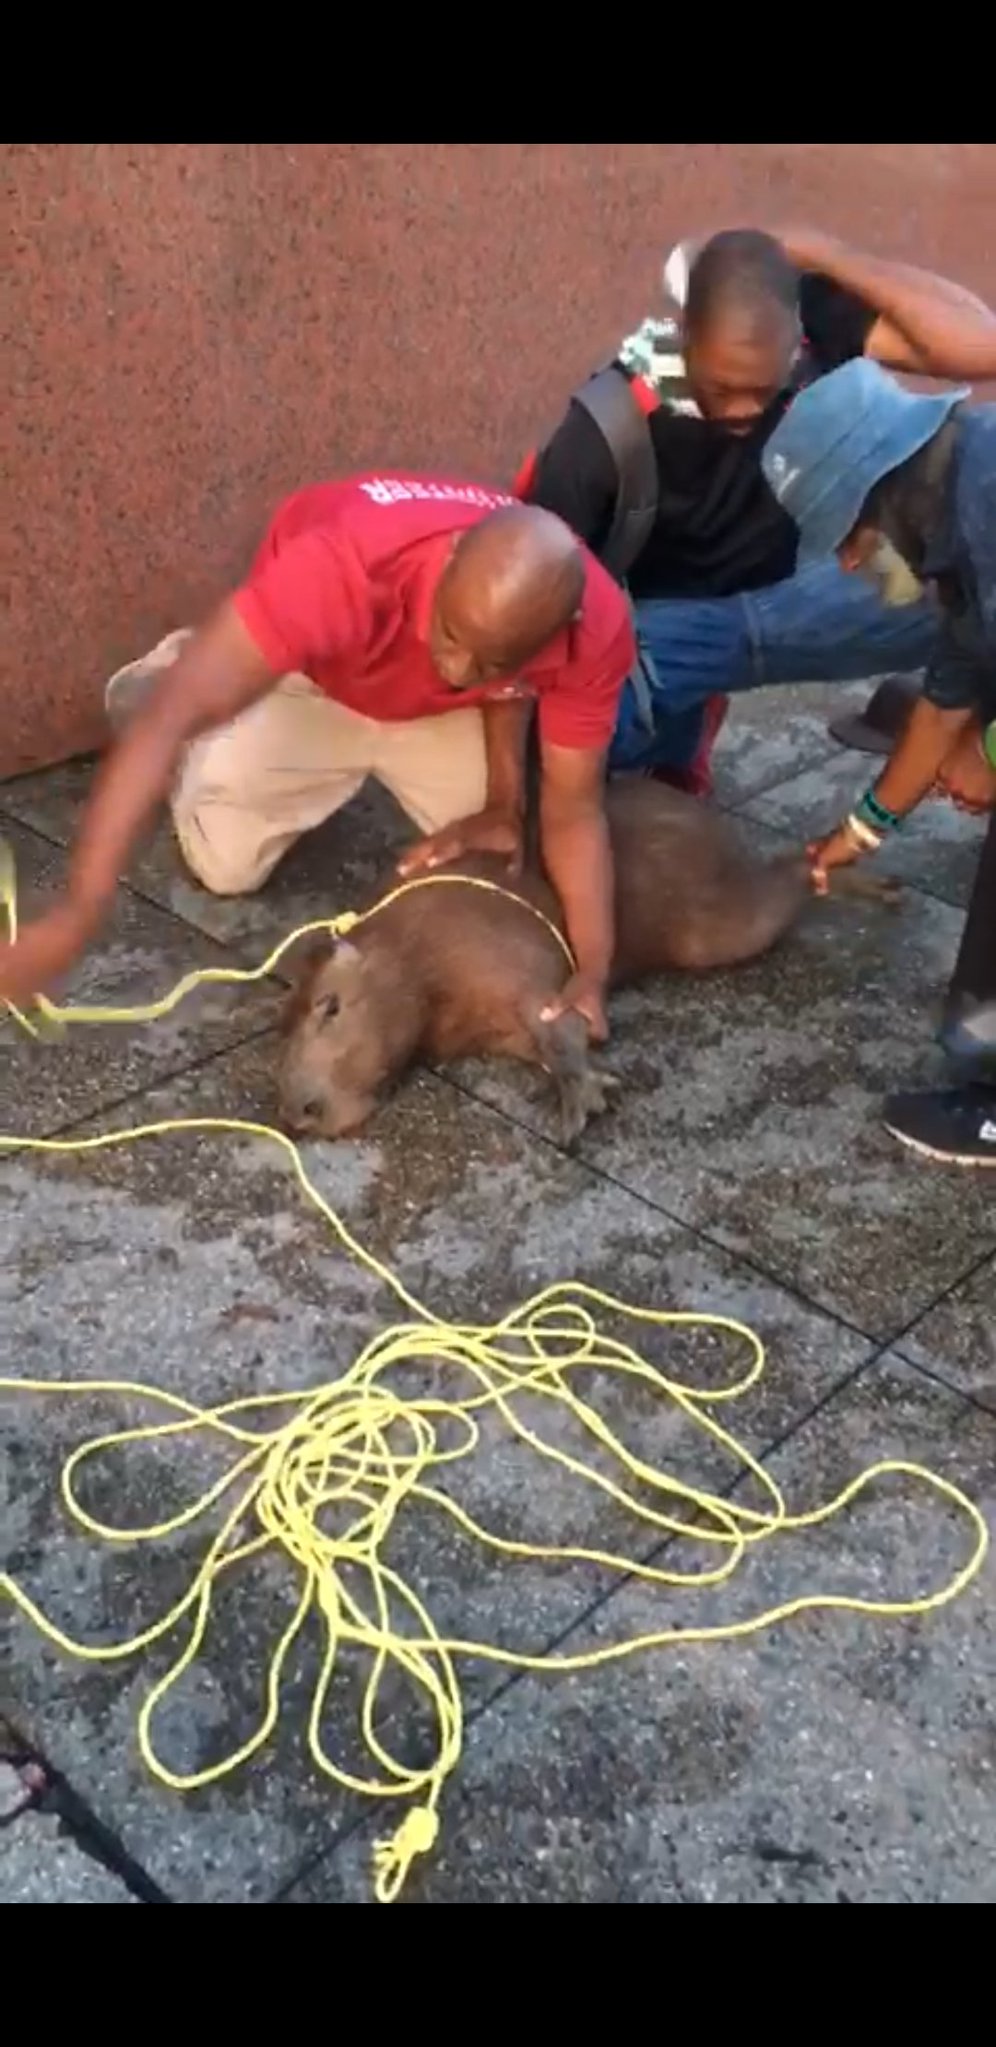 Capybara caught by a group of men in PoS